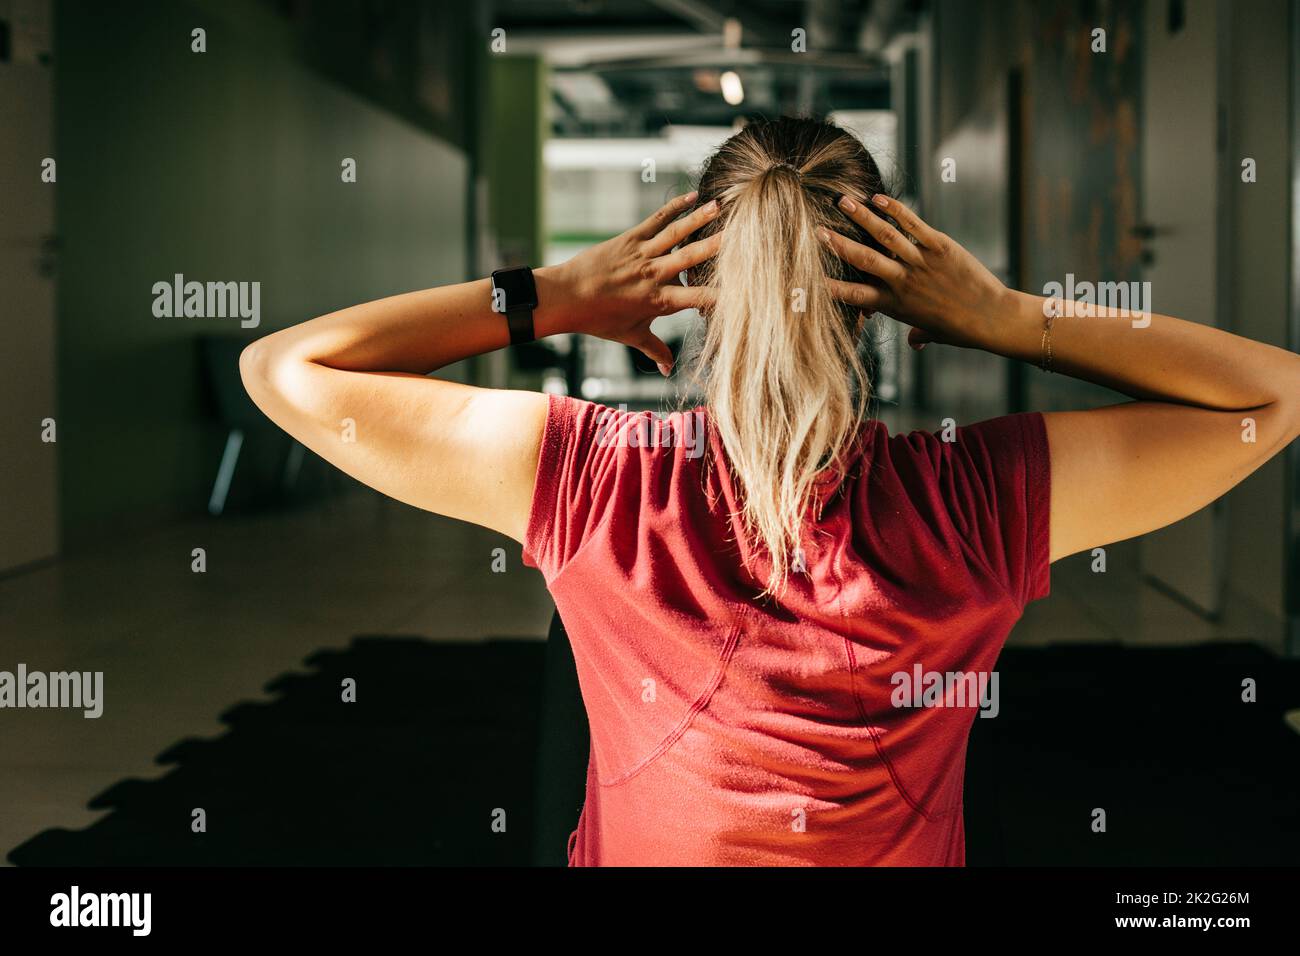 Girl with hair tied in ponytail pump press in fitness gym keeping hands behind head, back view. Plus size woman do cardio workout by lifting body Stock Photo